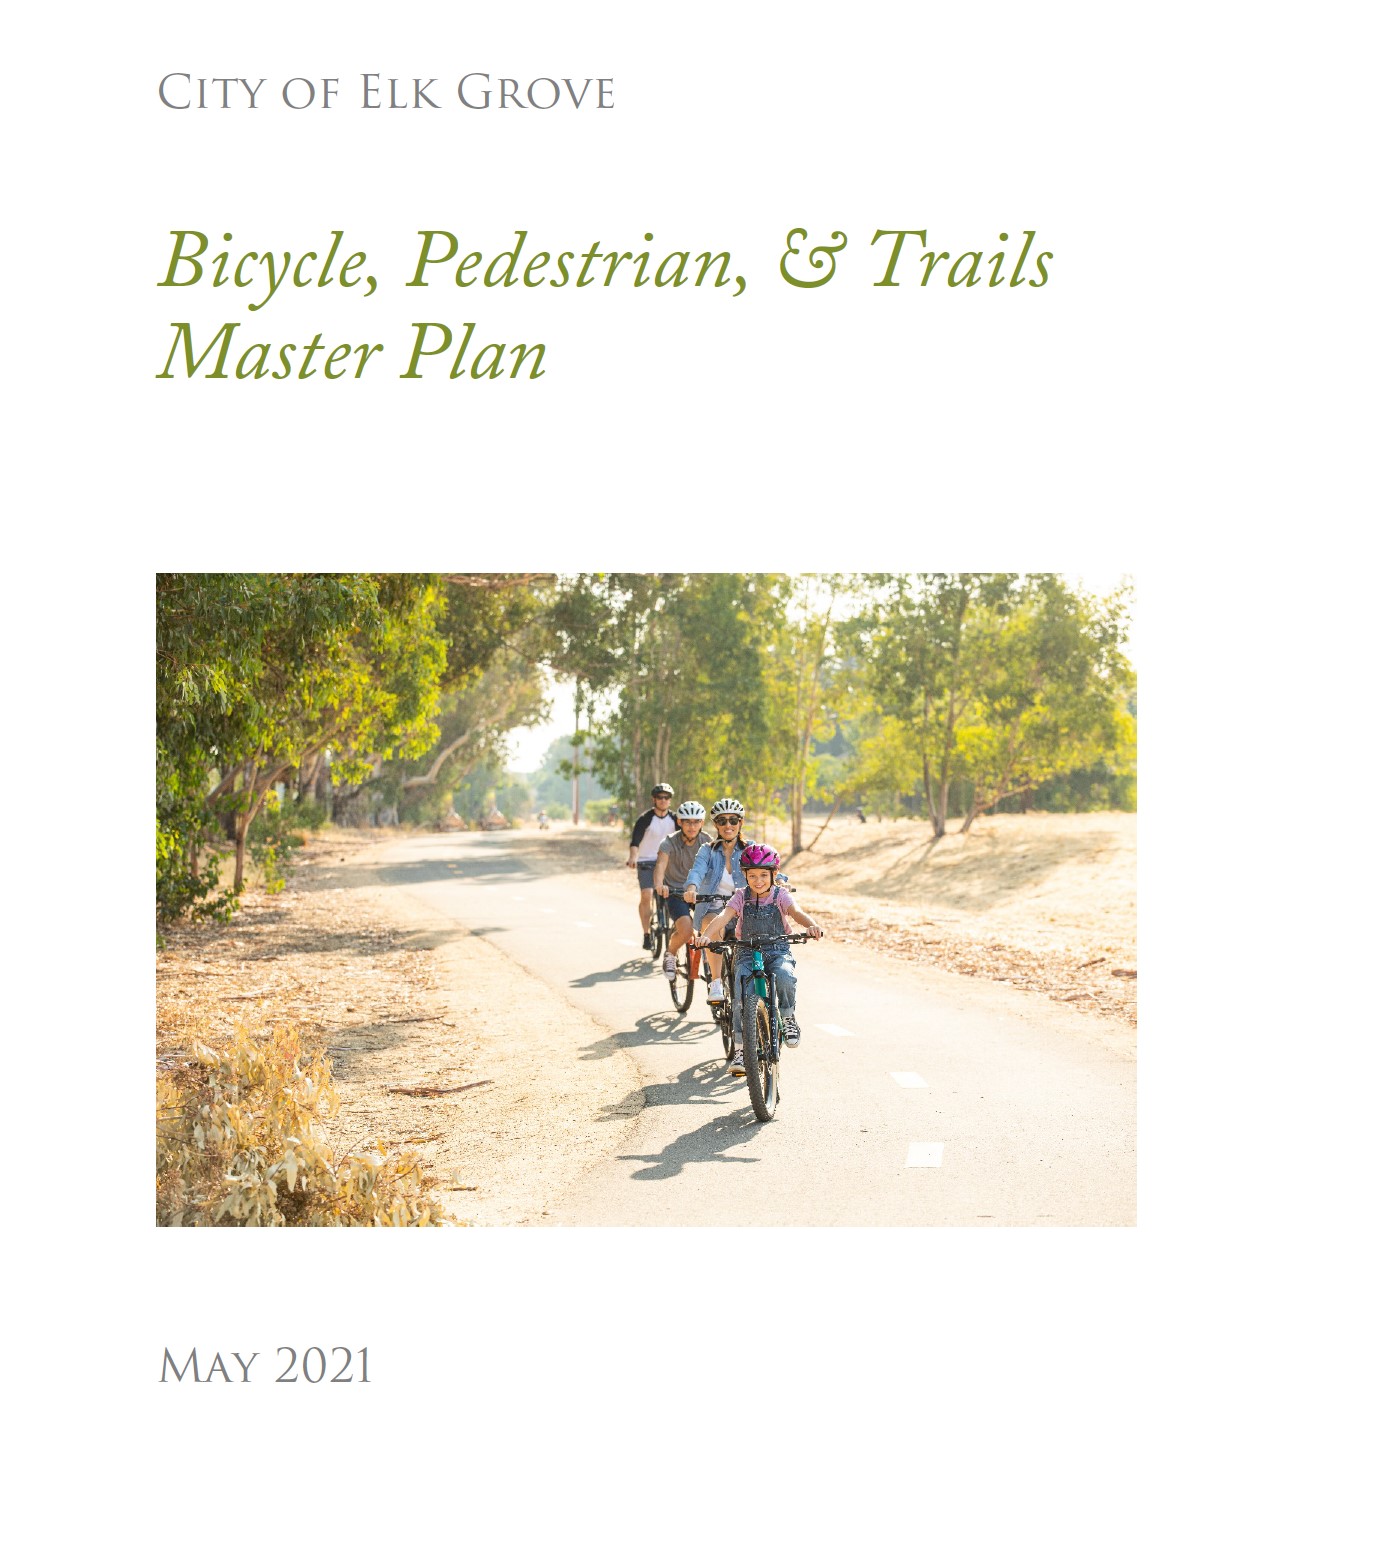 Bicycle, Pedestrian, and Trails Master Plan